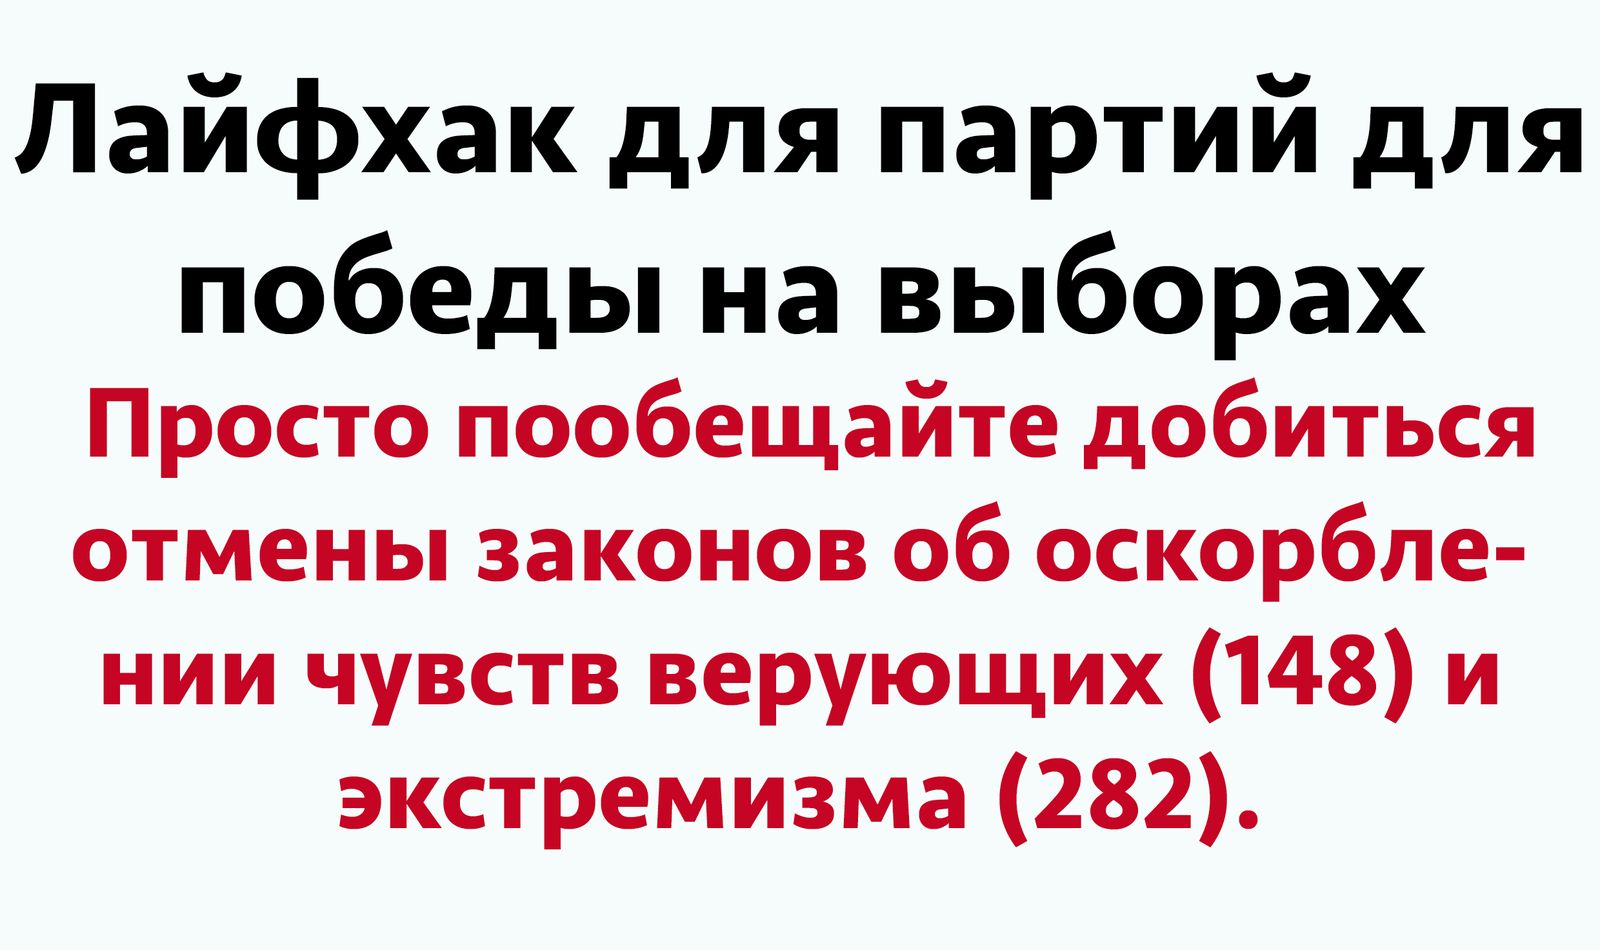 Life hack for elections - Elections, Insulting the feelings of believers, Extremism, 148, Victory, Promise, 282 of the Criminal Code of the Russian Federation